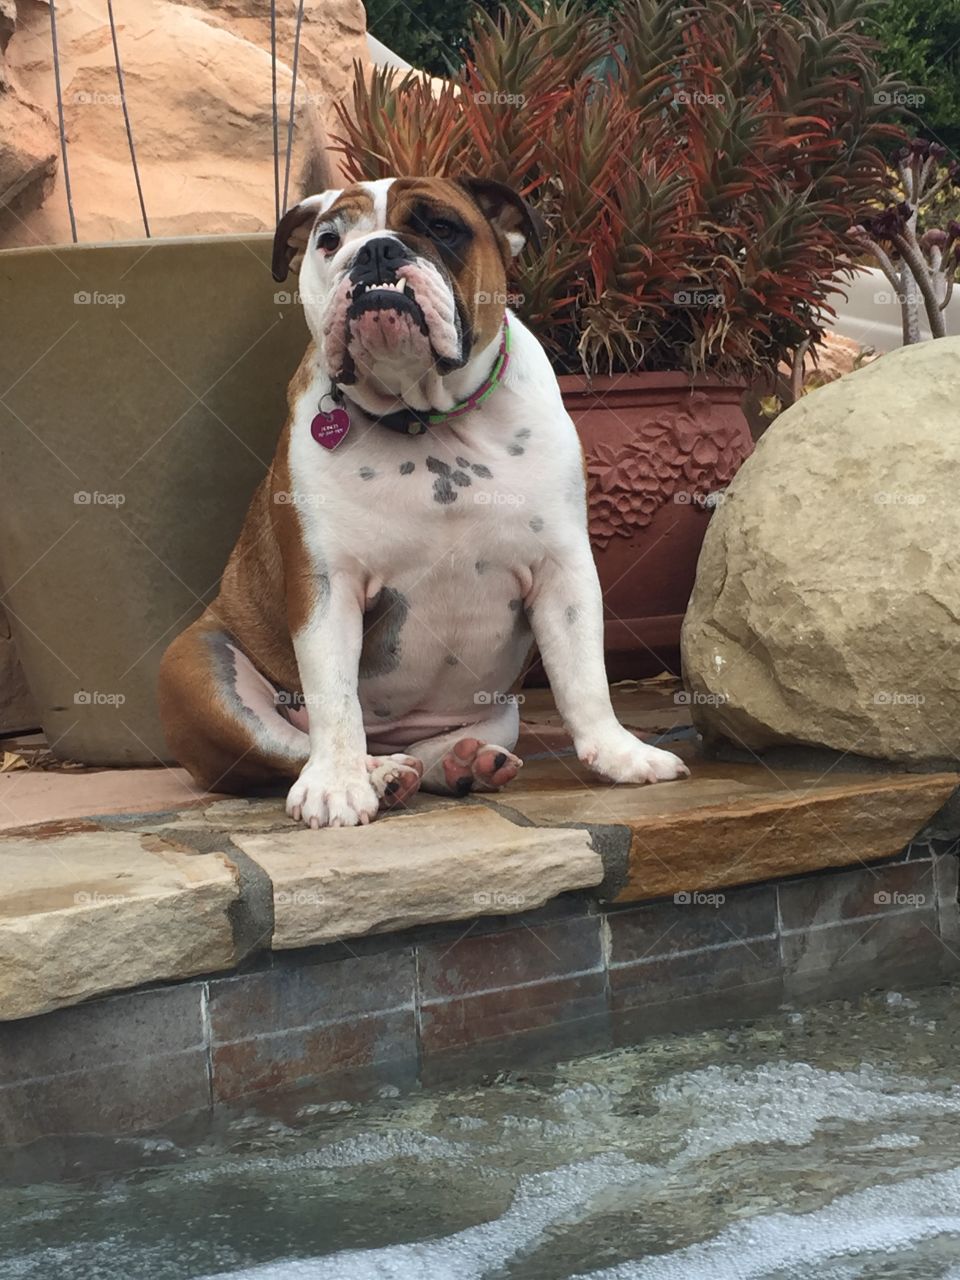 Life is hard for a bulldog